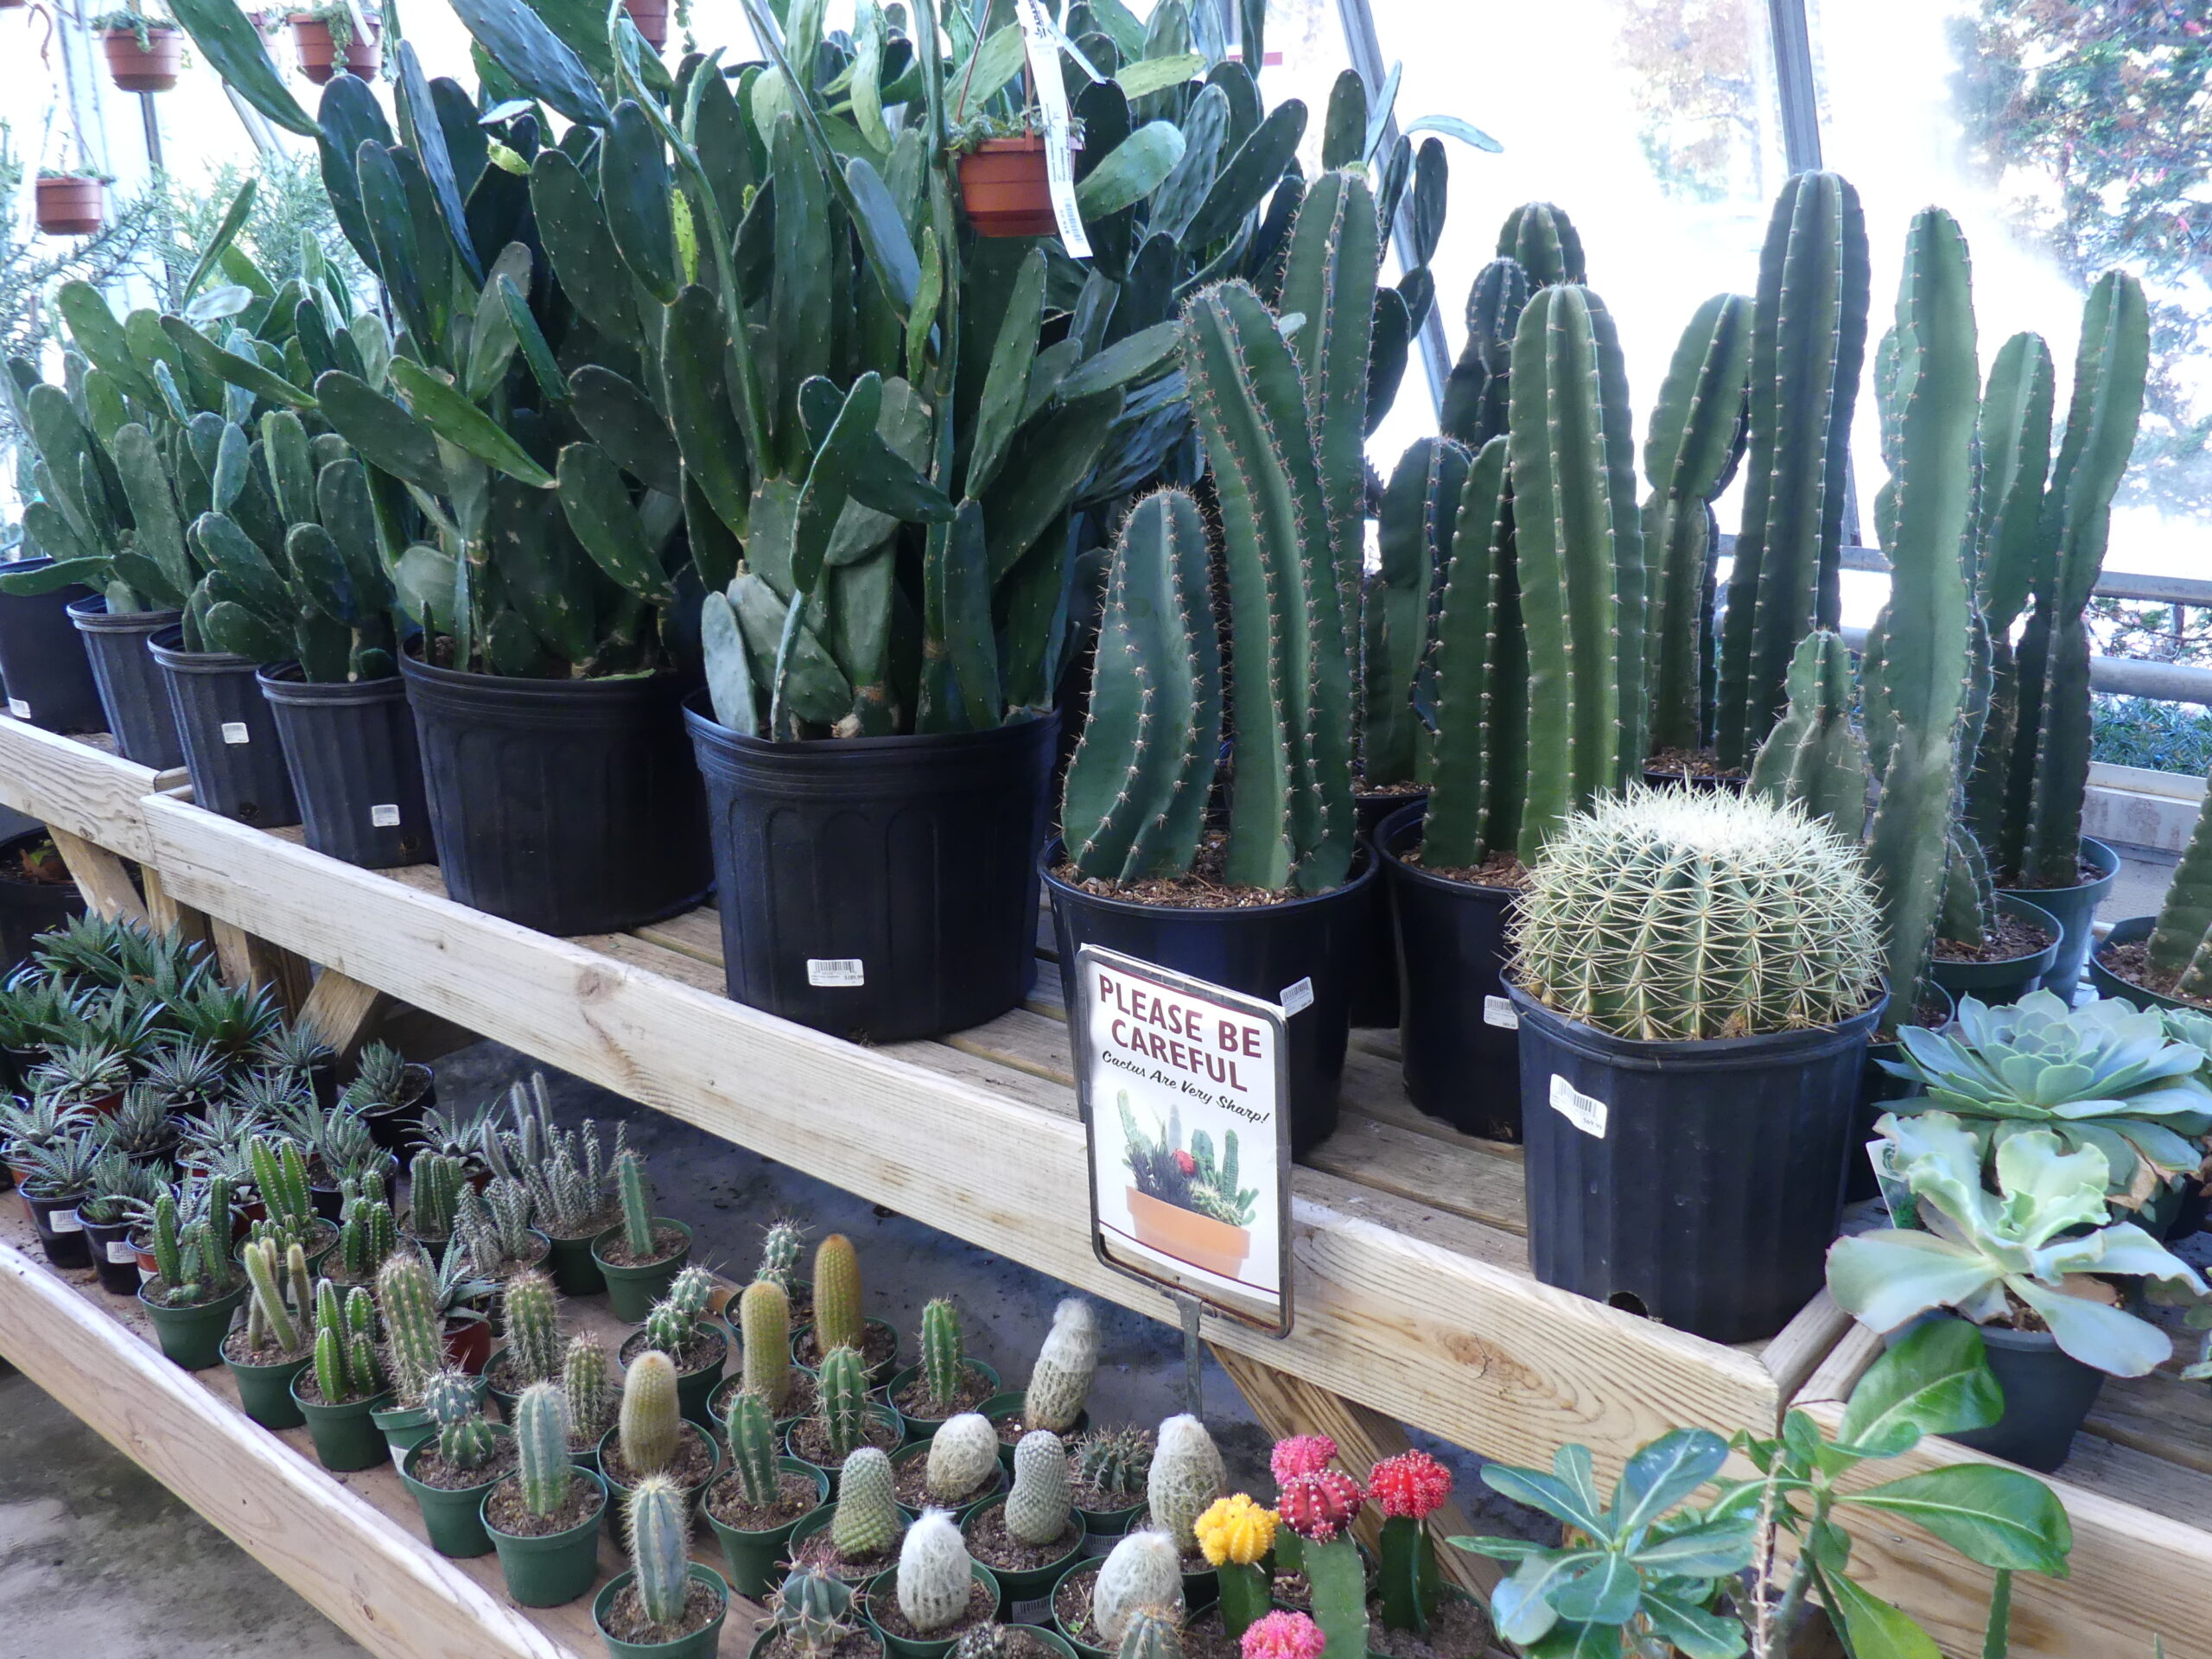 Cacti make great houseplants and demand little other than sun. They’ll tolerate cool nights and all will flower when 